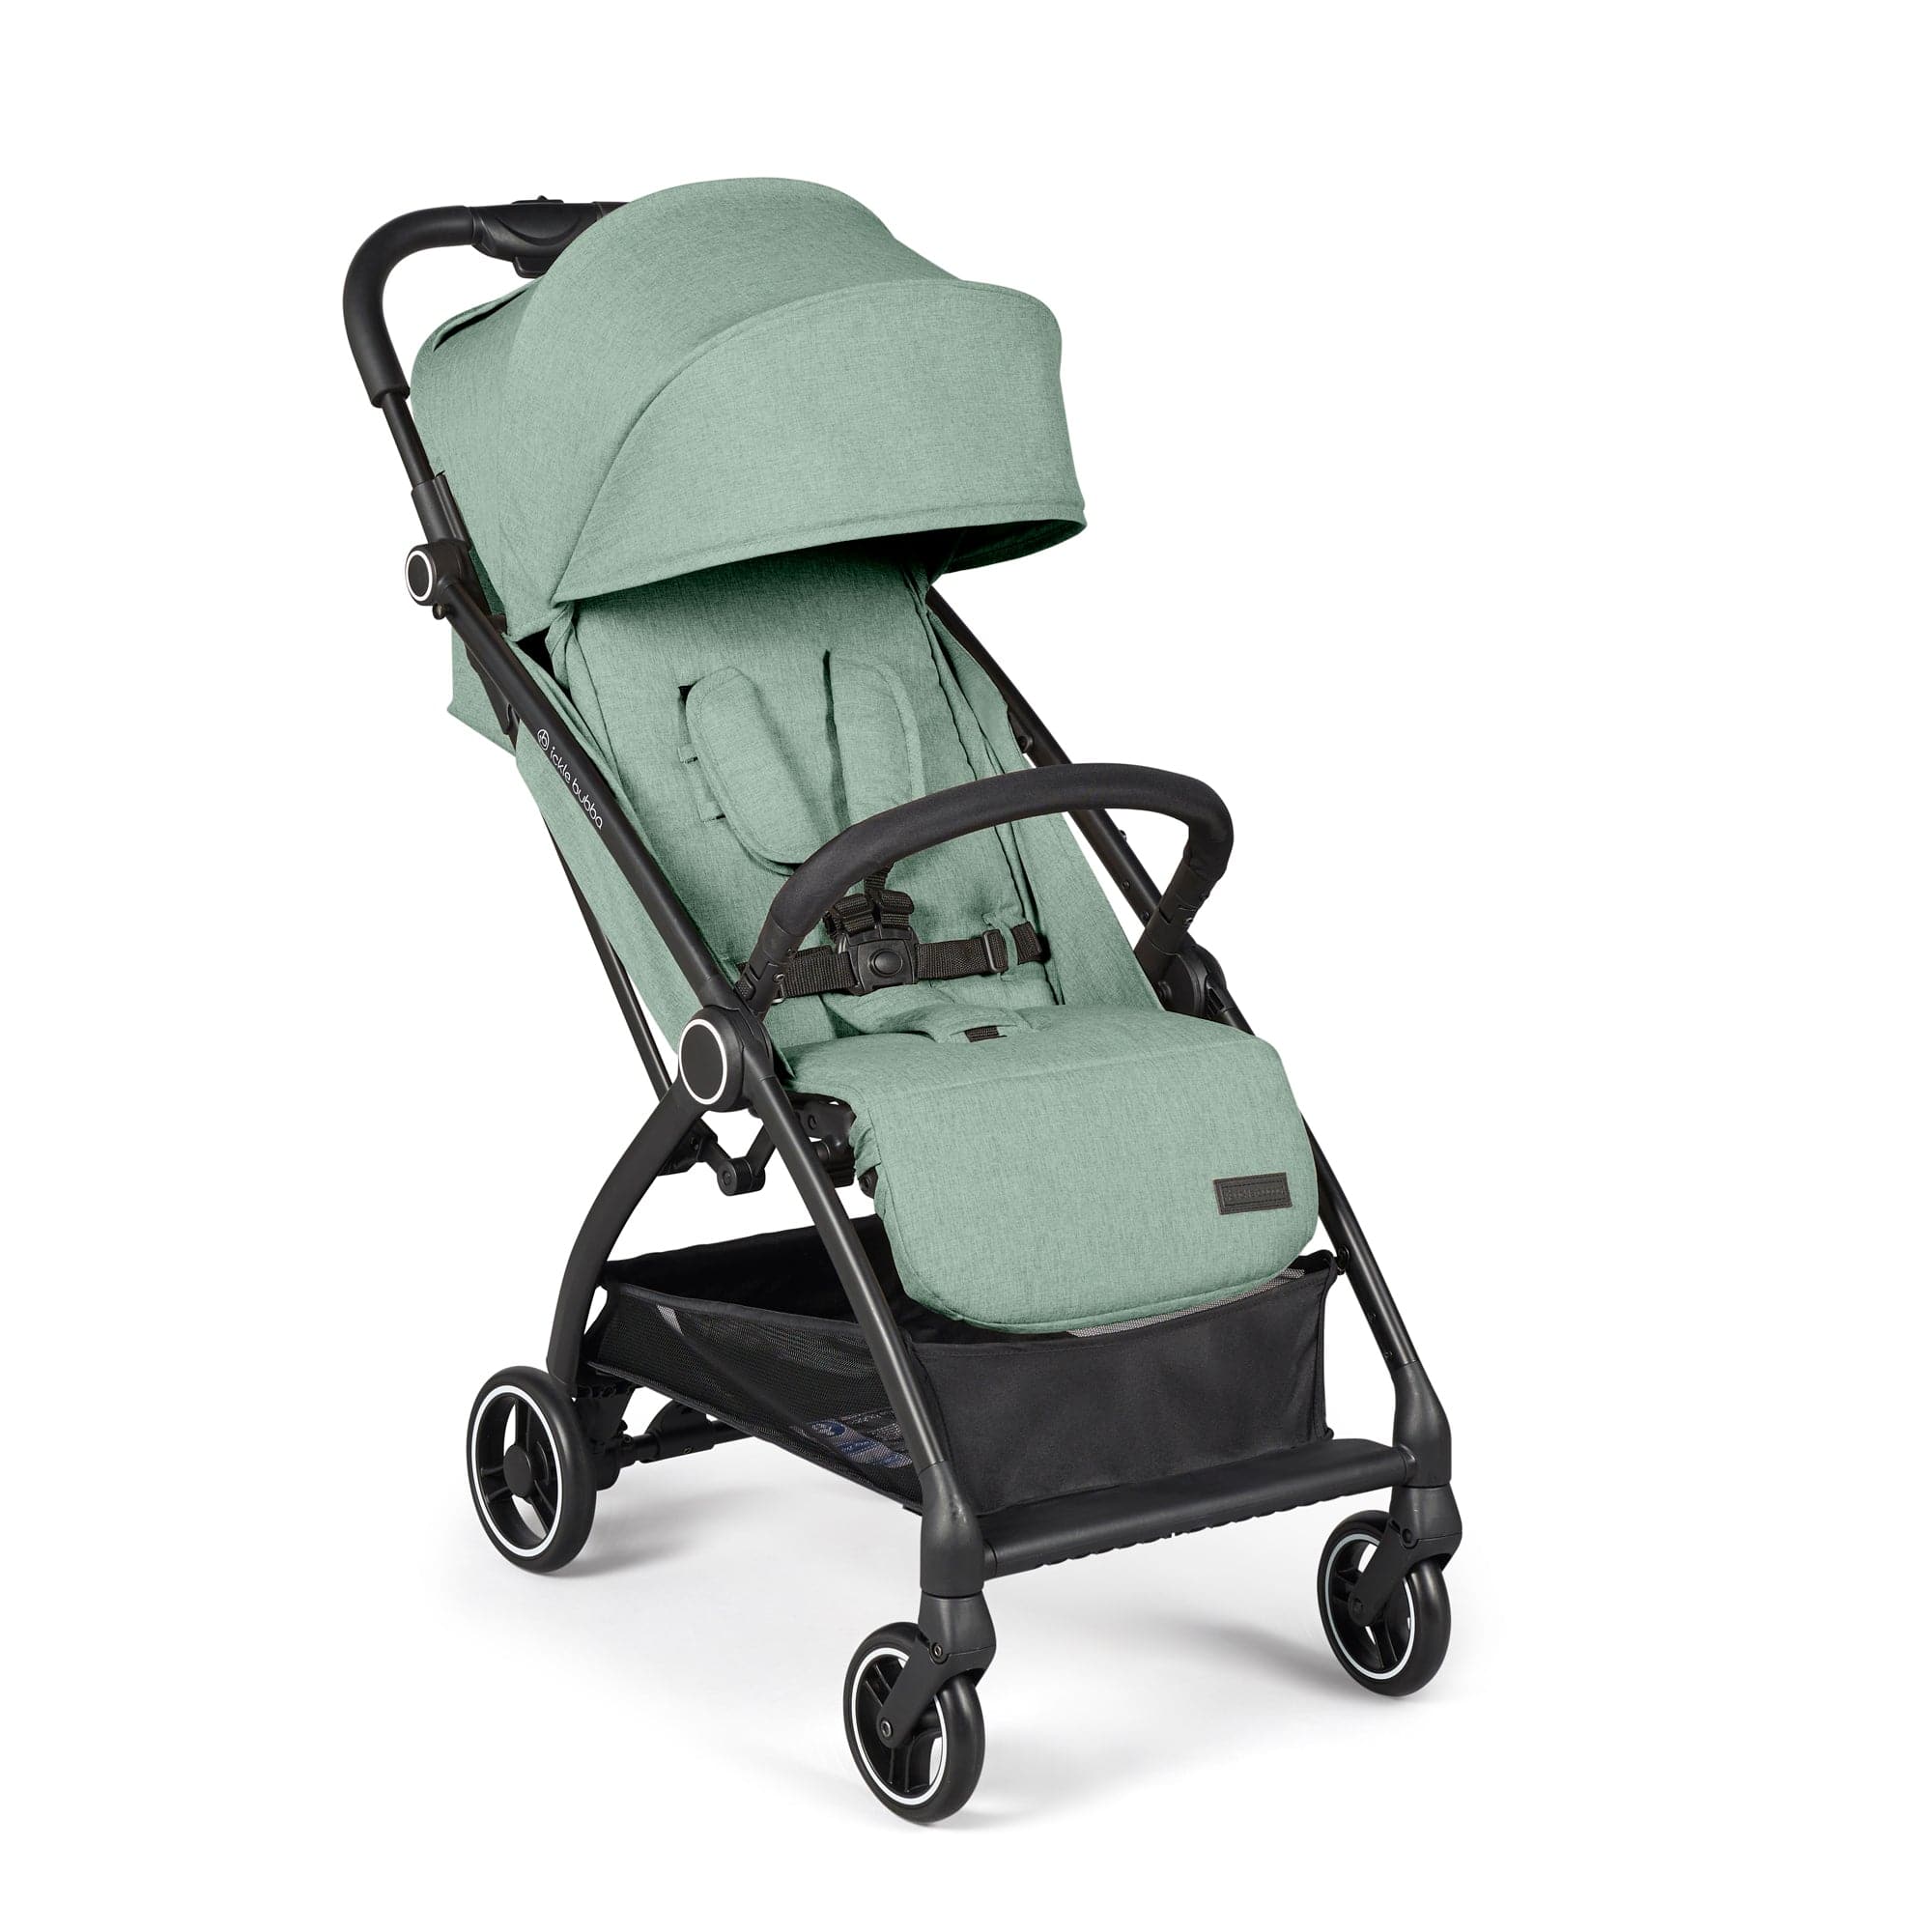 Ickle Bubba Aries Autofold Stroller - Sage Green - For Your Little One